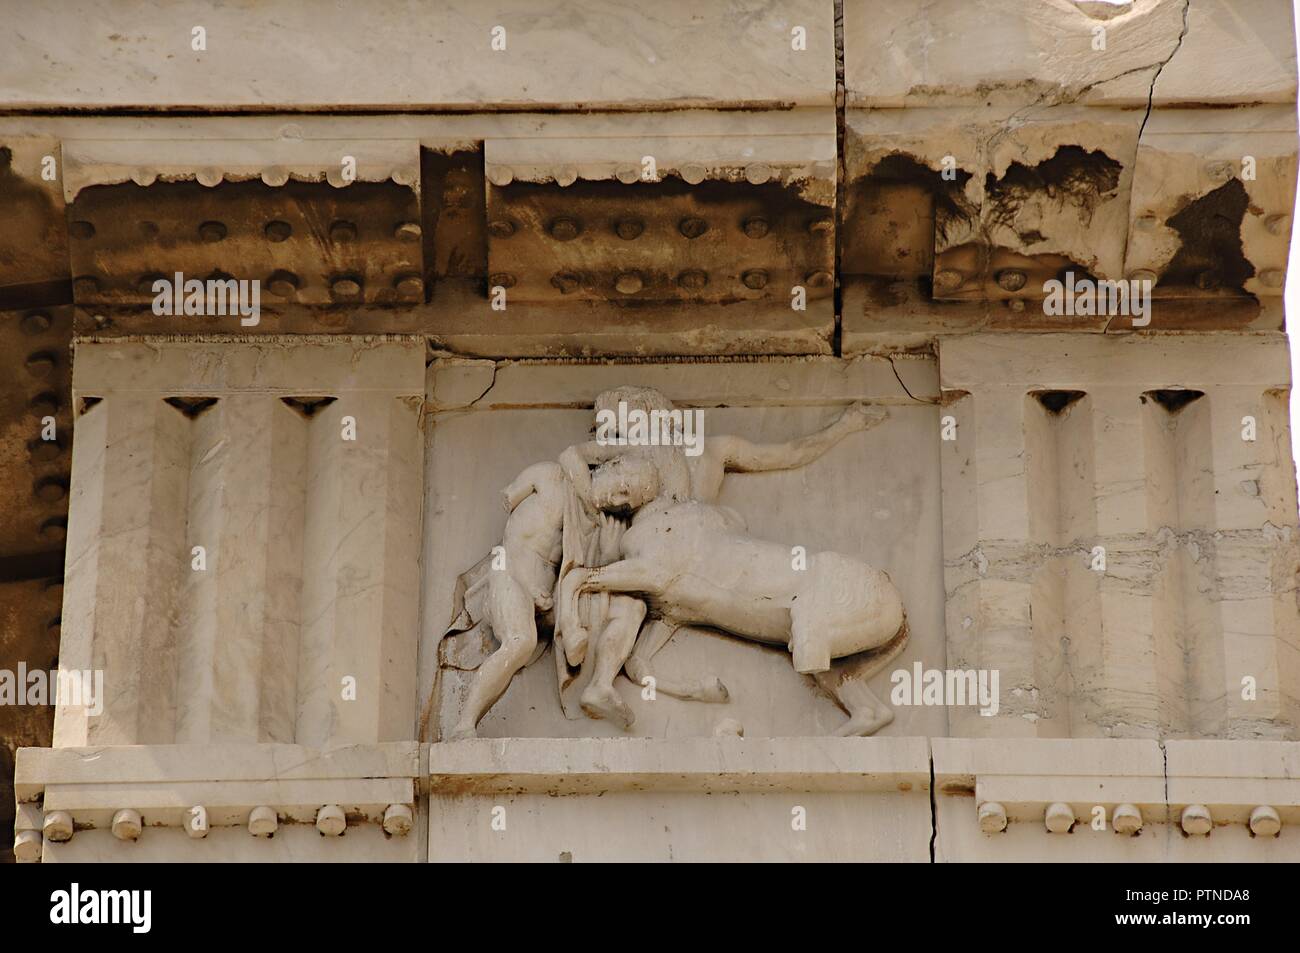 Greece. Athens. Acropolis. Parthenon. Classical temple dedicated to Athena. 447 BC-432 BC. Doric order. Architect: Iktinos and Callicrates. Sculptor Phidias. Frieze decorated with triglyphs and metopes. Detail, relief depicting a Lapith fighting a centaur. Replica. Stock Photo